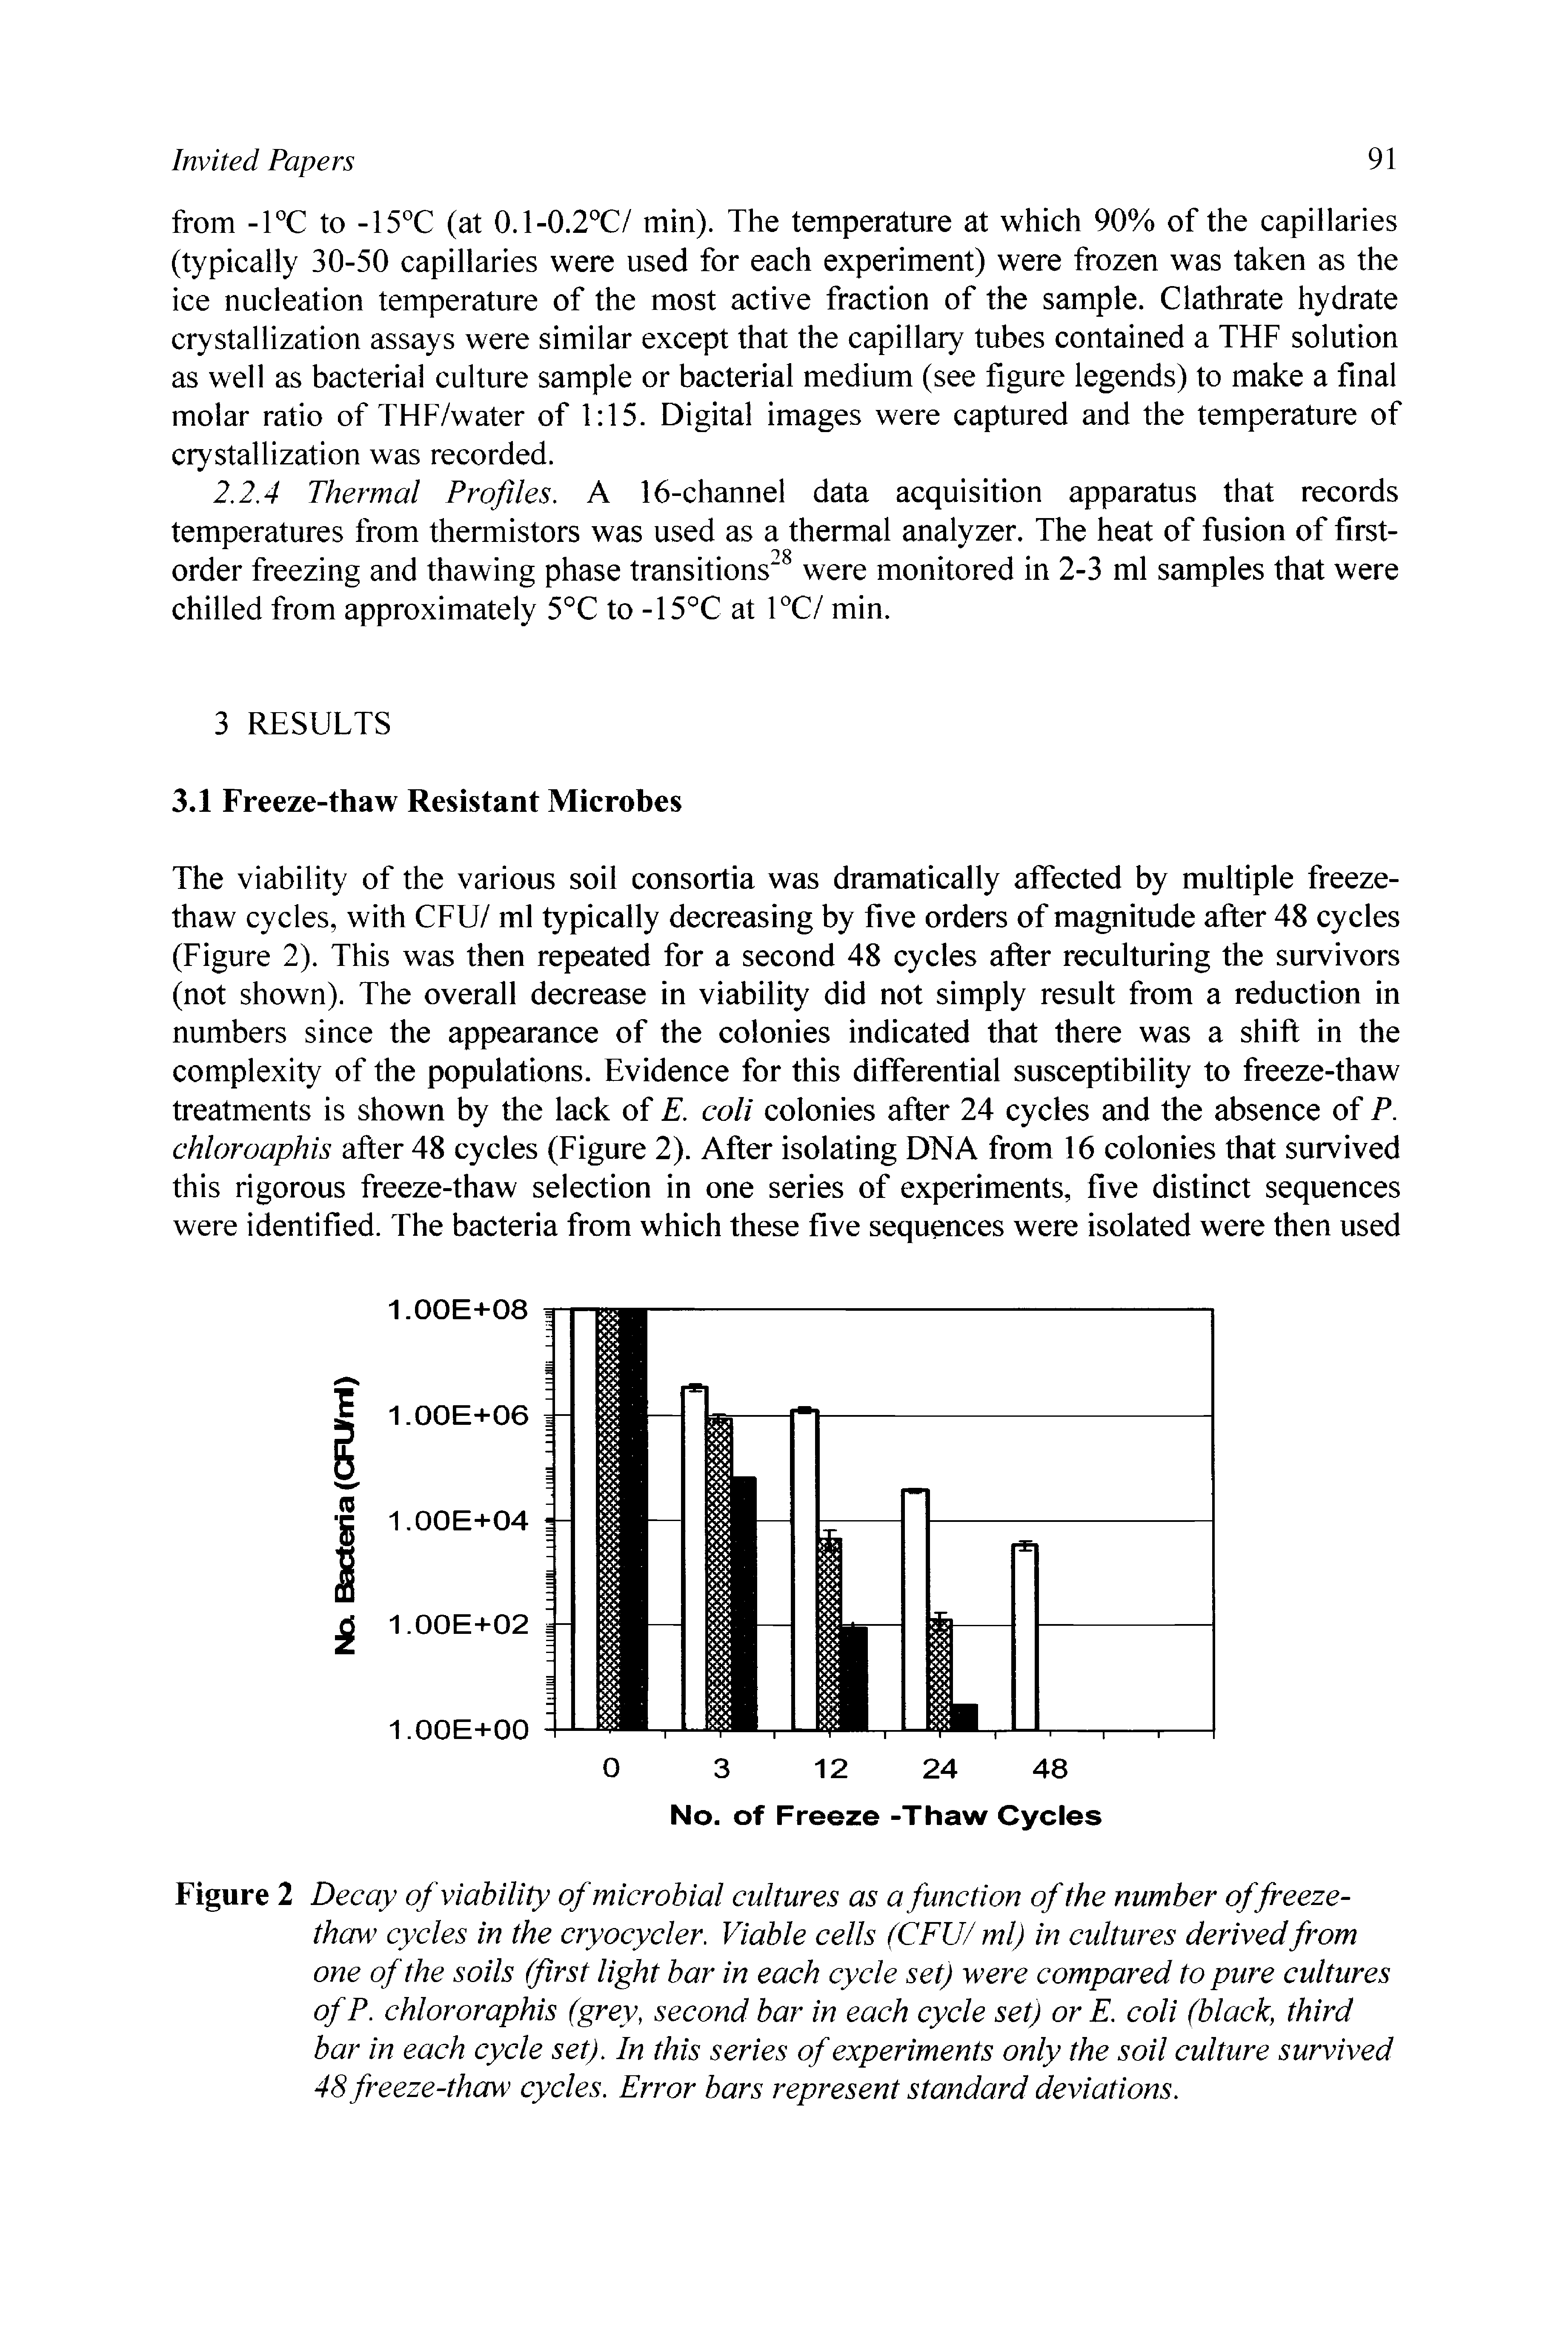 Figure 2 Decay of viability of microbial cultures as a function of the number offreeze-thaw cycles in the cryocycler. Viable cells (CFU/ml) in cultures derived from one of the soils (first light bar in each cycle set) were compared to pure cultures of P. chlororaphis (grey, second bar in each cycle set) or E. coli (black, third bar in each cycle set). In this series of experiments only the soil culture survived 48 freeze-thaw cycles. Error bars represent standard deviations.